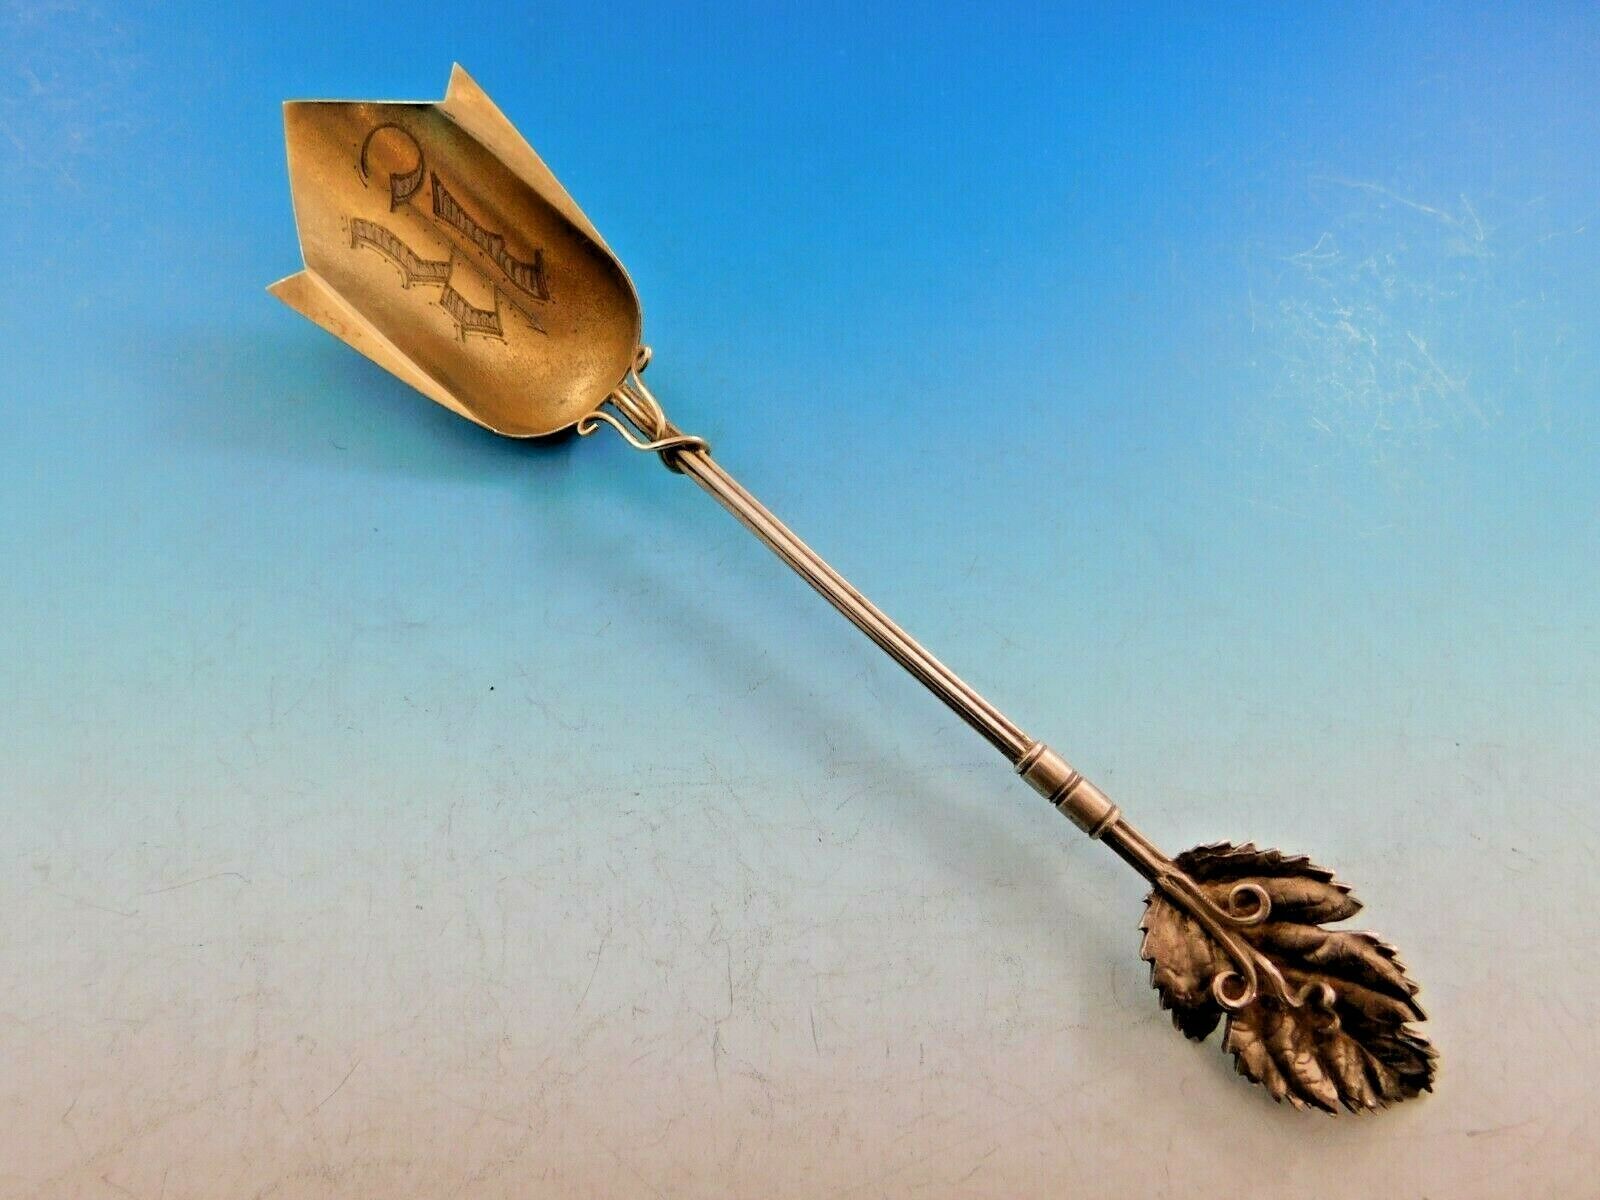 Primary image for Art Silver by Wood & Hughes Sterling Silver Cheese Scoop Leaf & Vine Motif 7 3/4